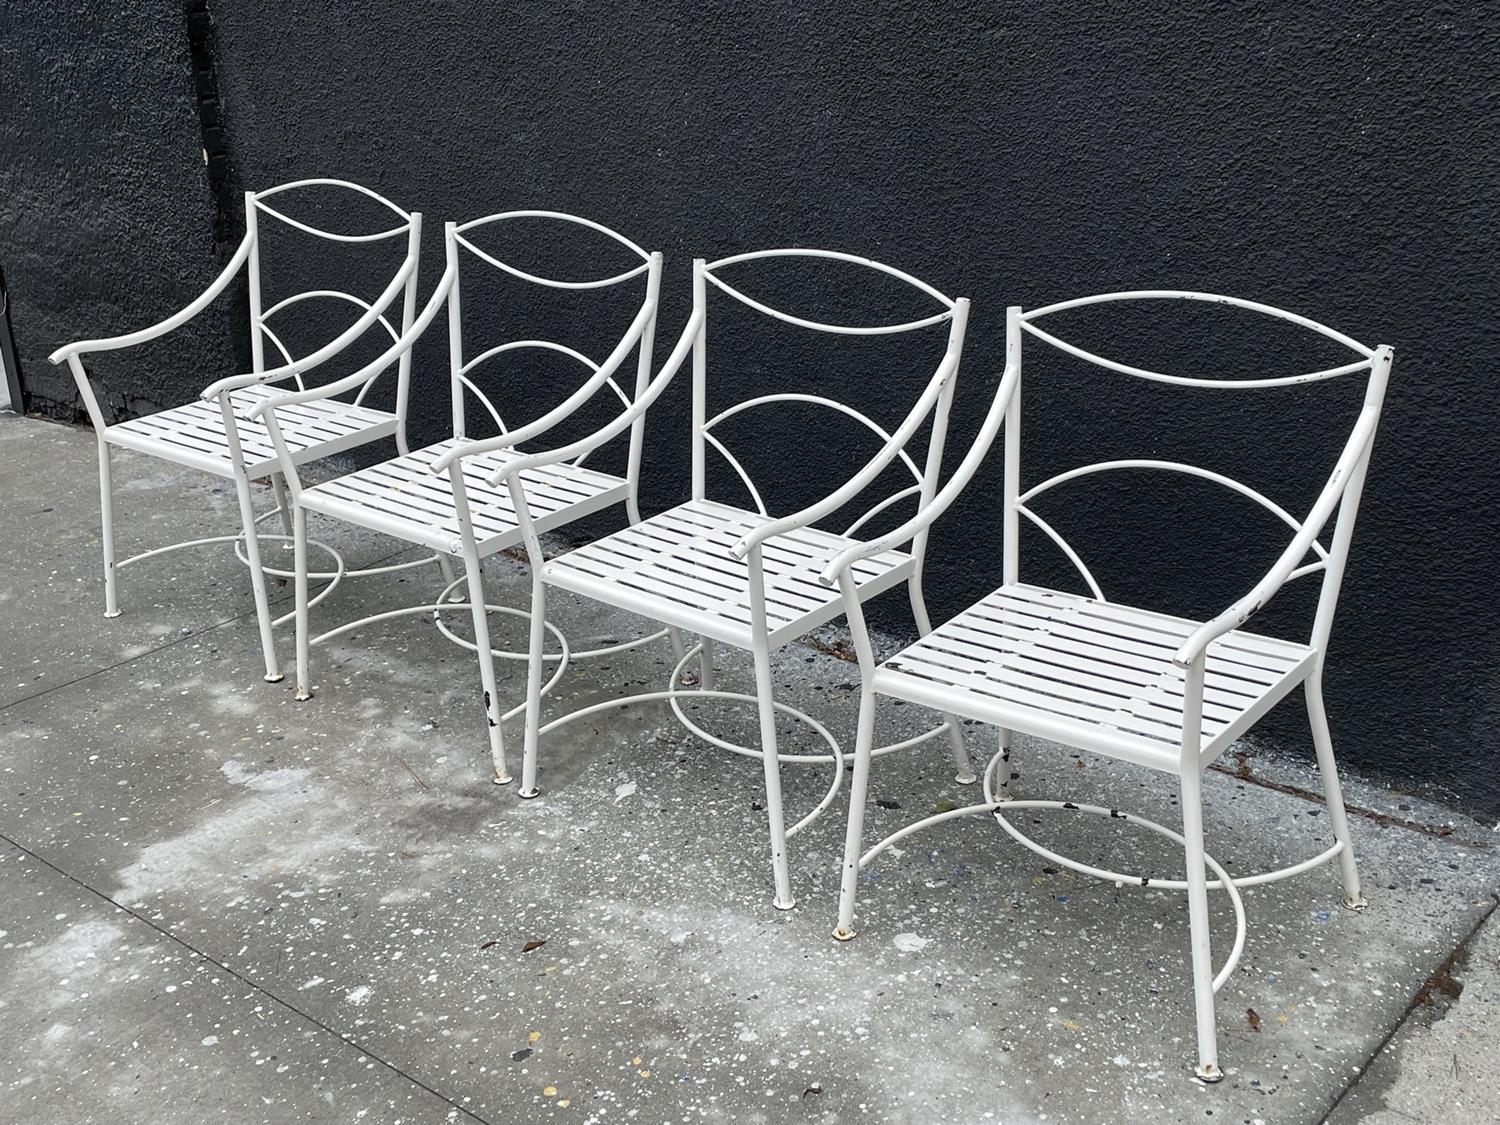 Stunning Set of 4 Regency Style Wrought Iron Armchairs – perfect for adding a touch of elegance to any indoor or outdoor space.

Crafted from high-quality wrought iron and a powder coat finish, these chairs are built to last and feature a timeless